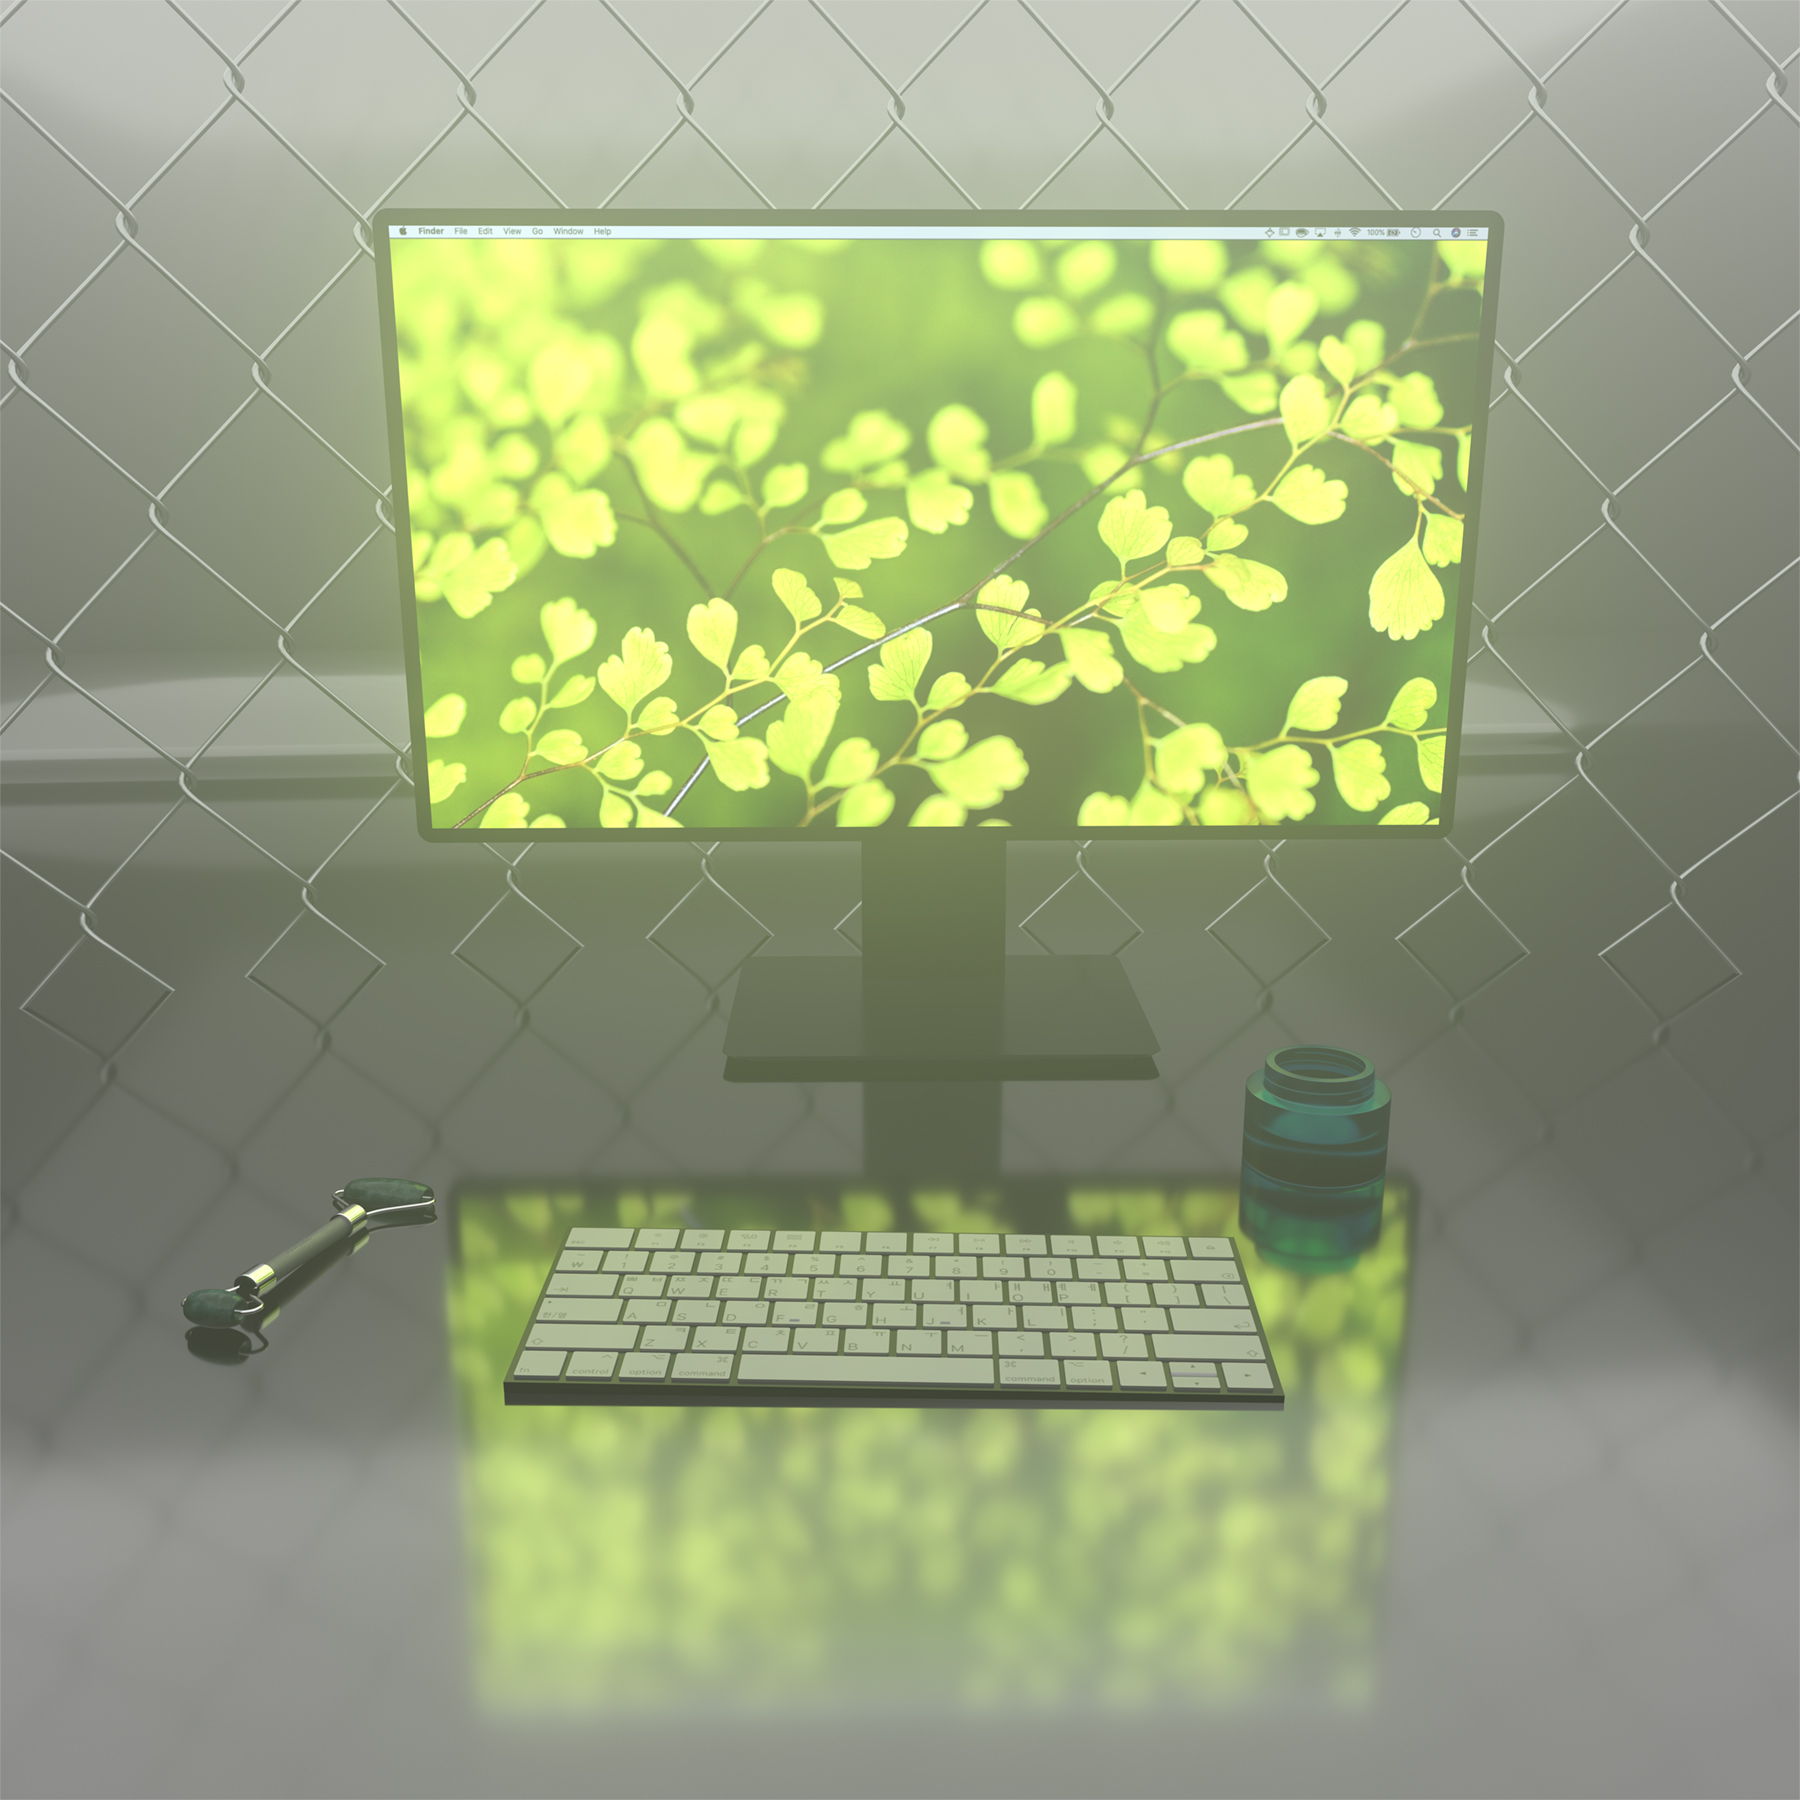 Digital image of a glowing computer screen in front of a chain link fence with beauty products, image courtesy of Robert Willcox